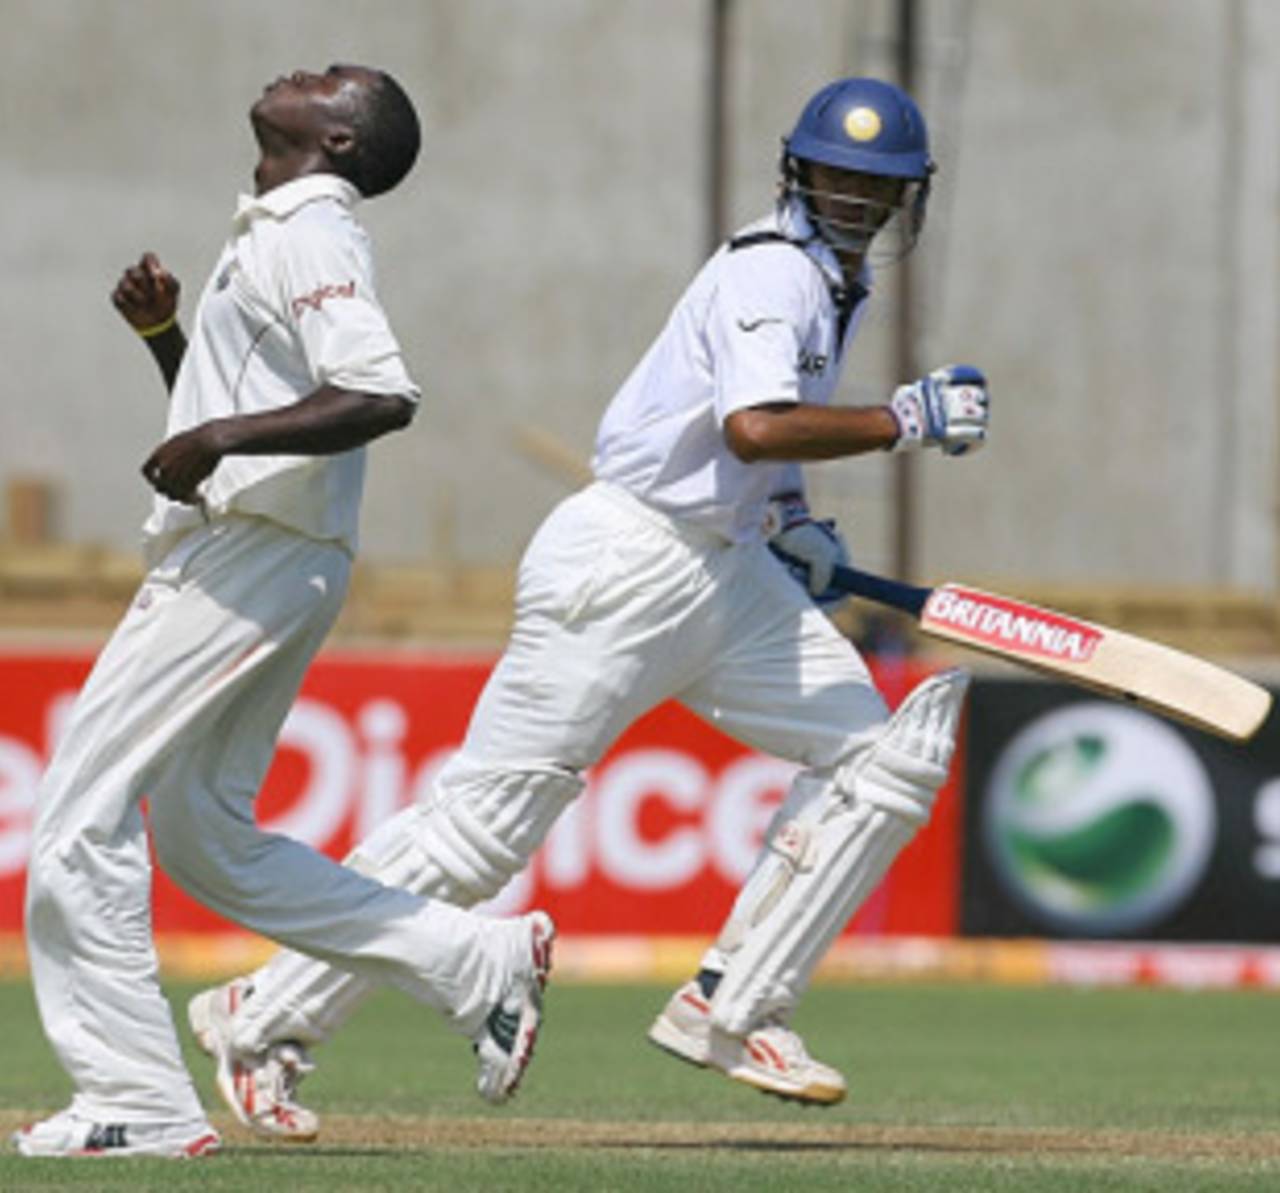 Jerome Taylor looks frustrated as Rahul Dravid takes a single, West Indies v India, 4th Test, Jamaica, 2nd day, July 1, 2006